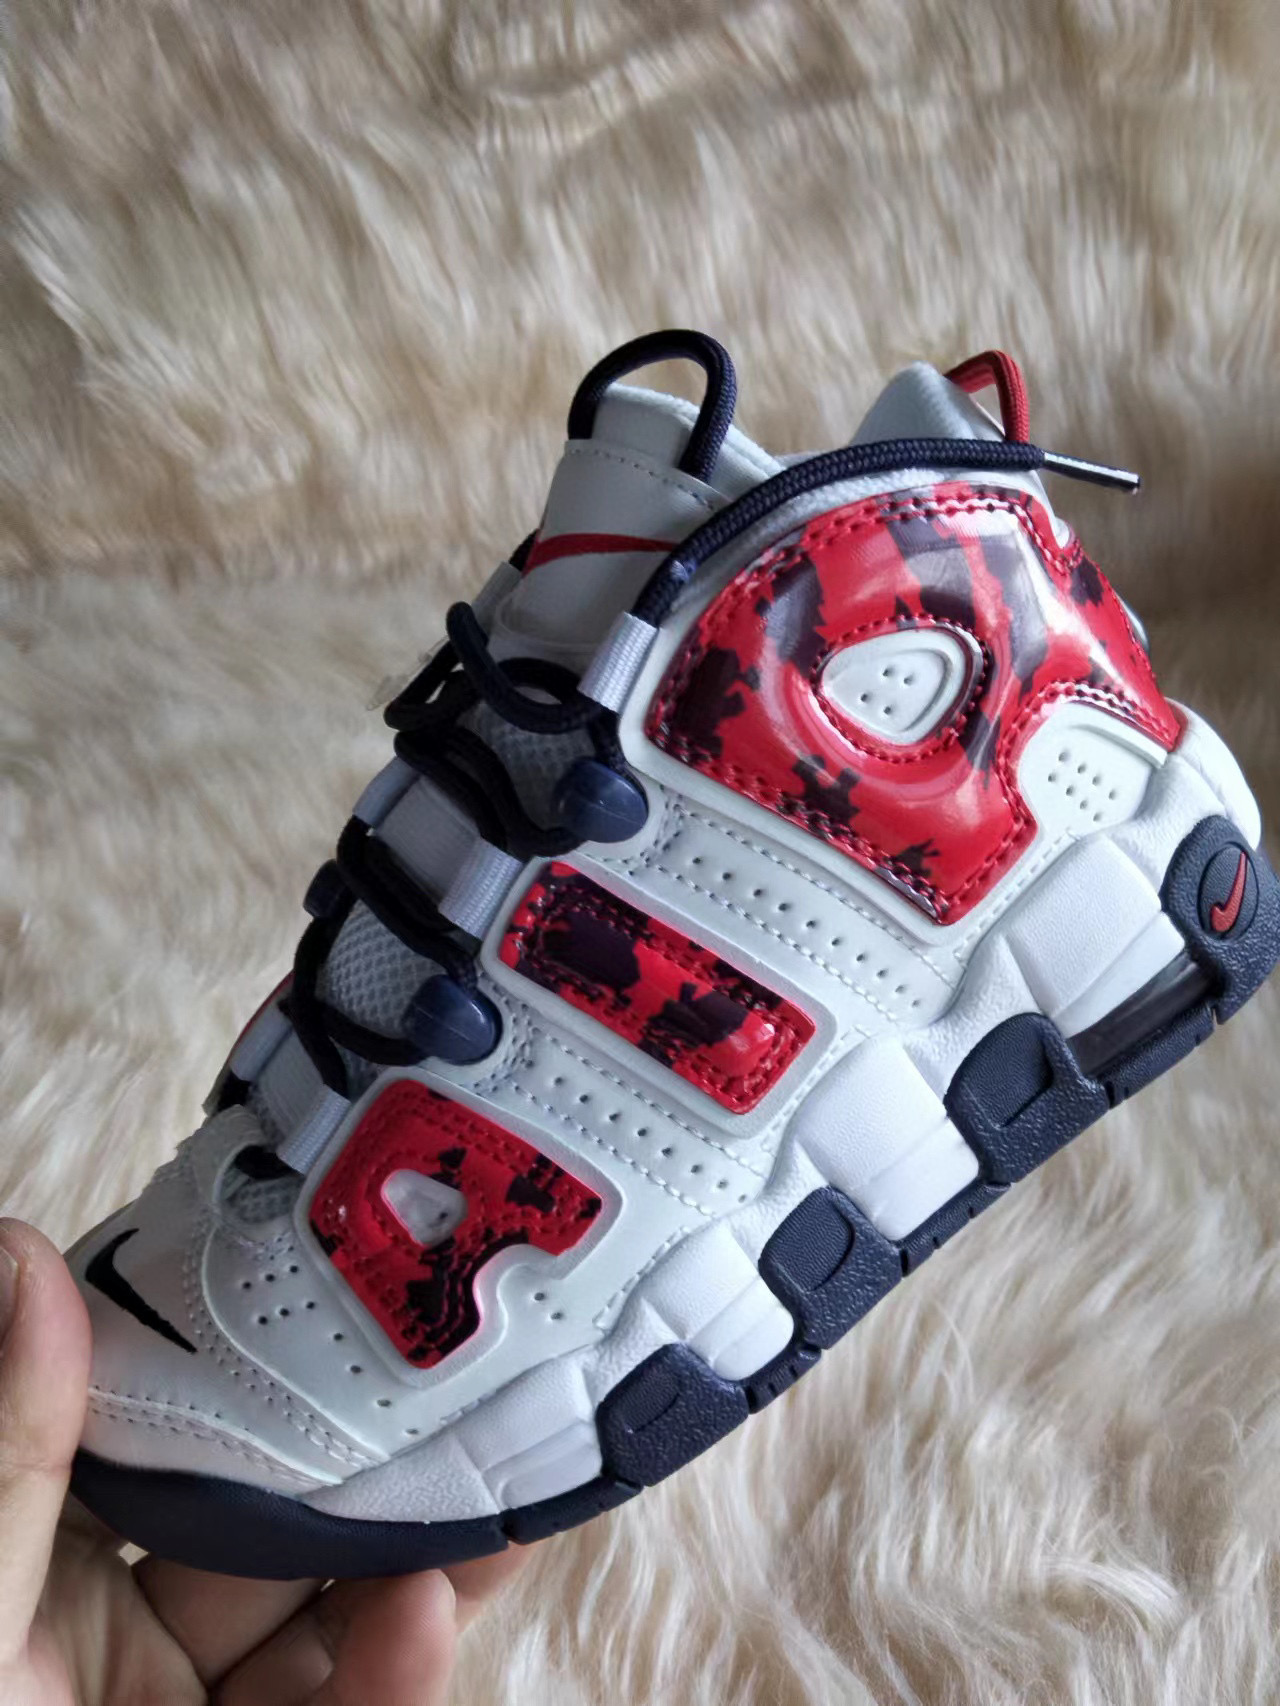 Nike Air More Uptempo Sneakers For Kids # 269996, cheap Shoes for Kids Nike Shoes For Kids, only $54!